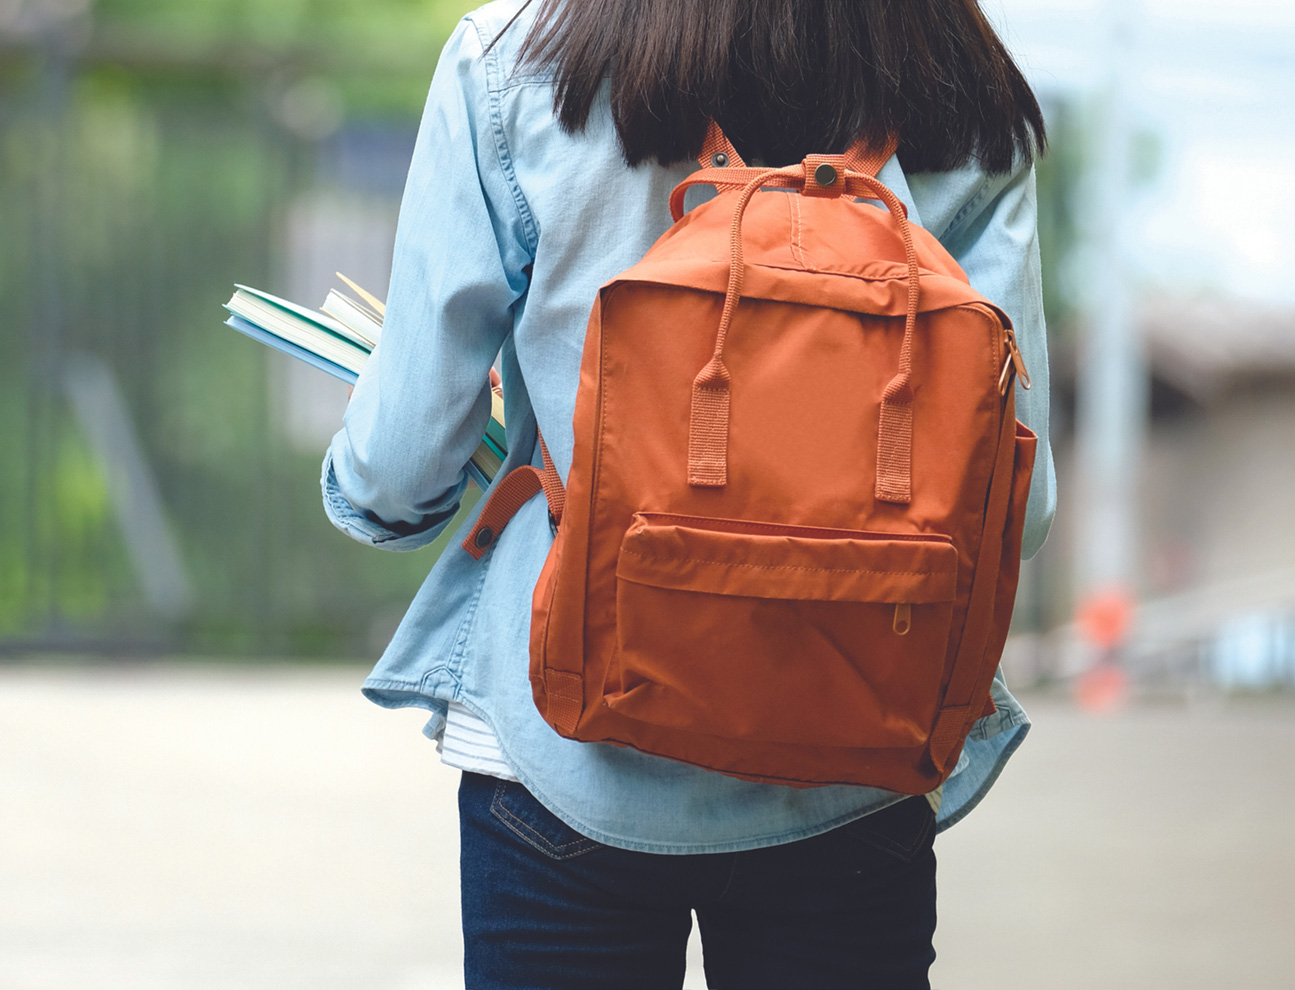 Female college student with long dark hair wearing a backpack planning her college journey.